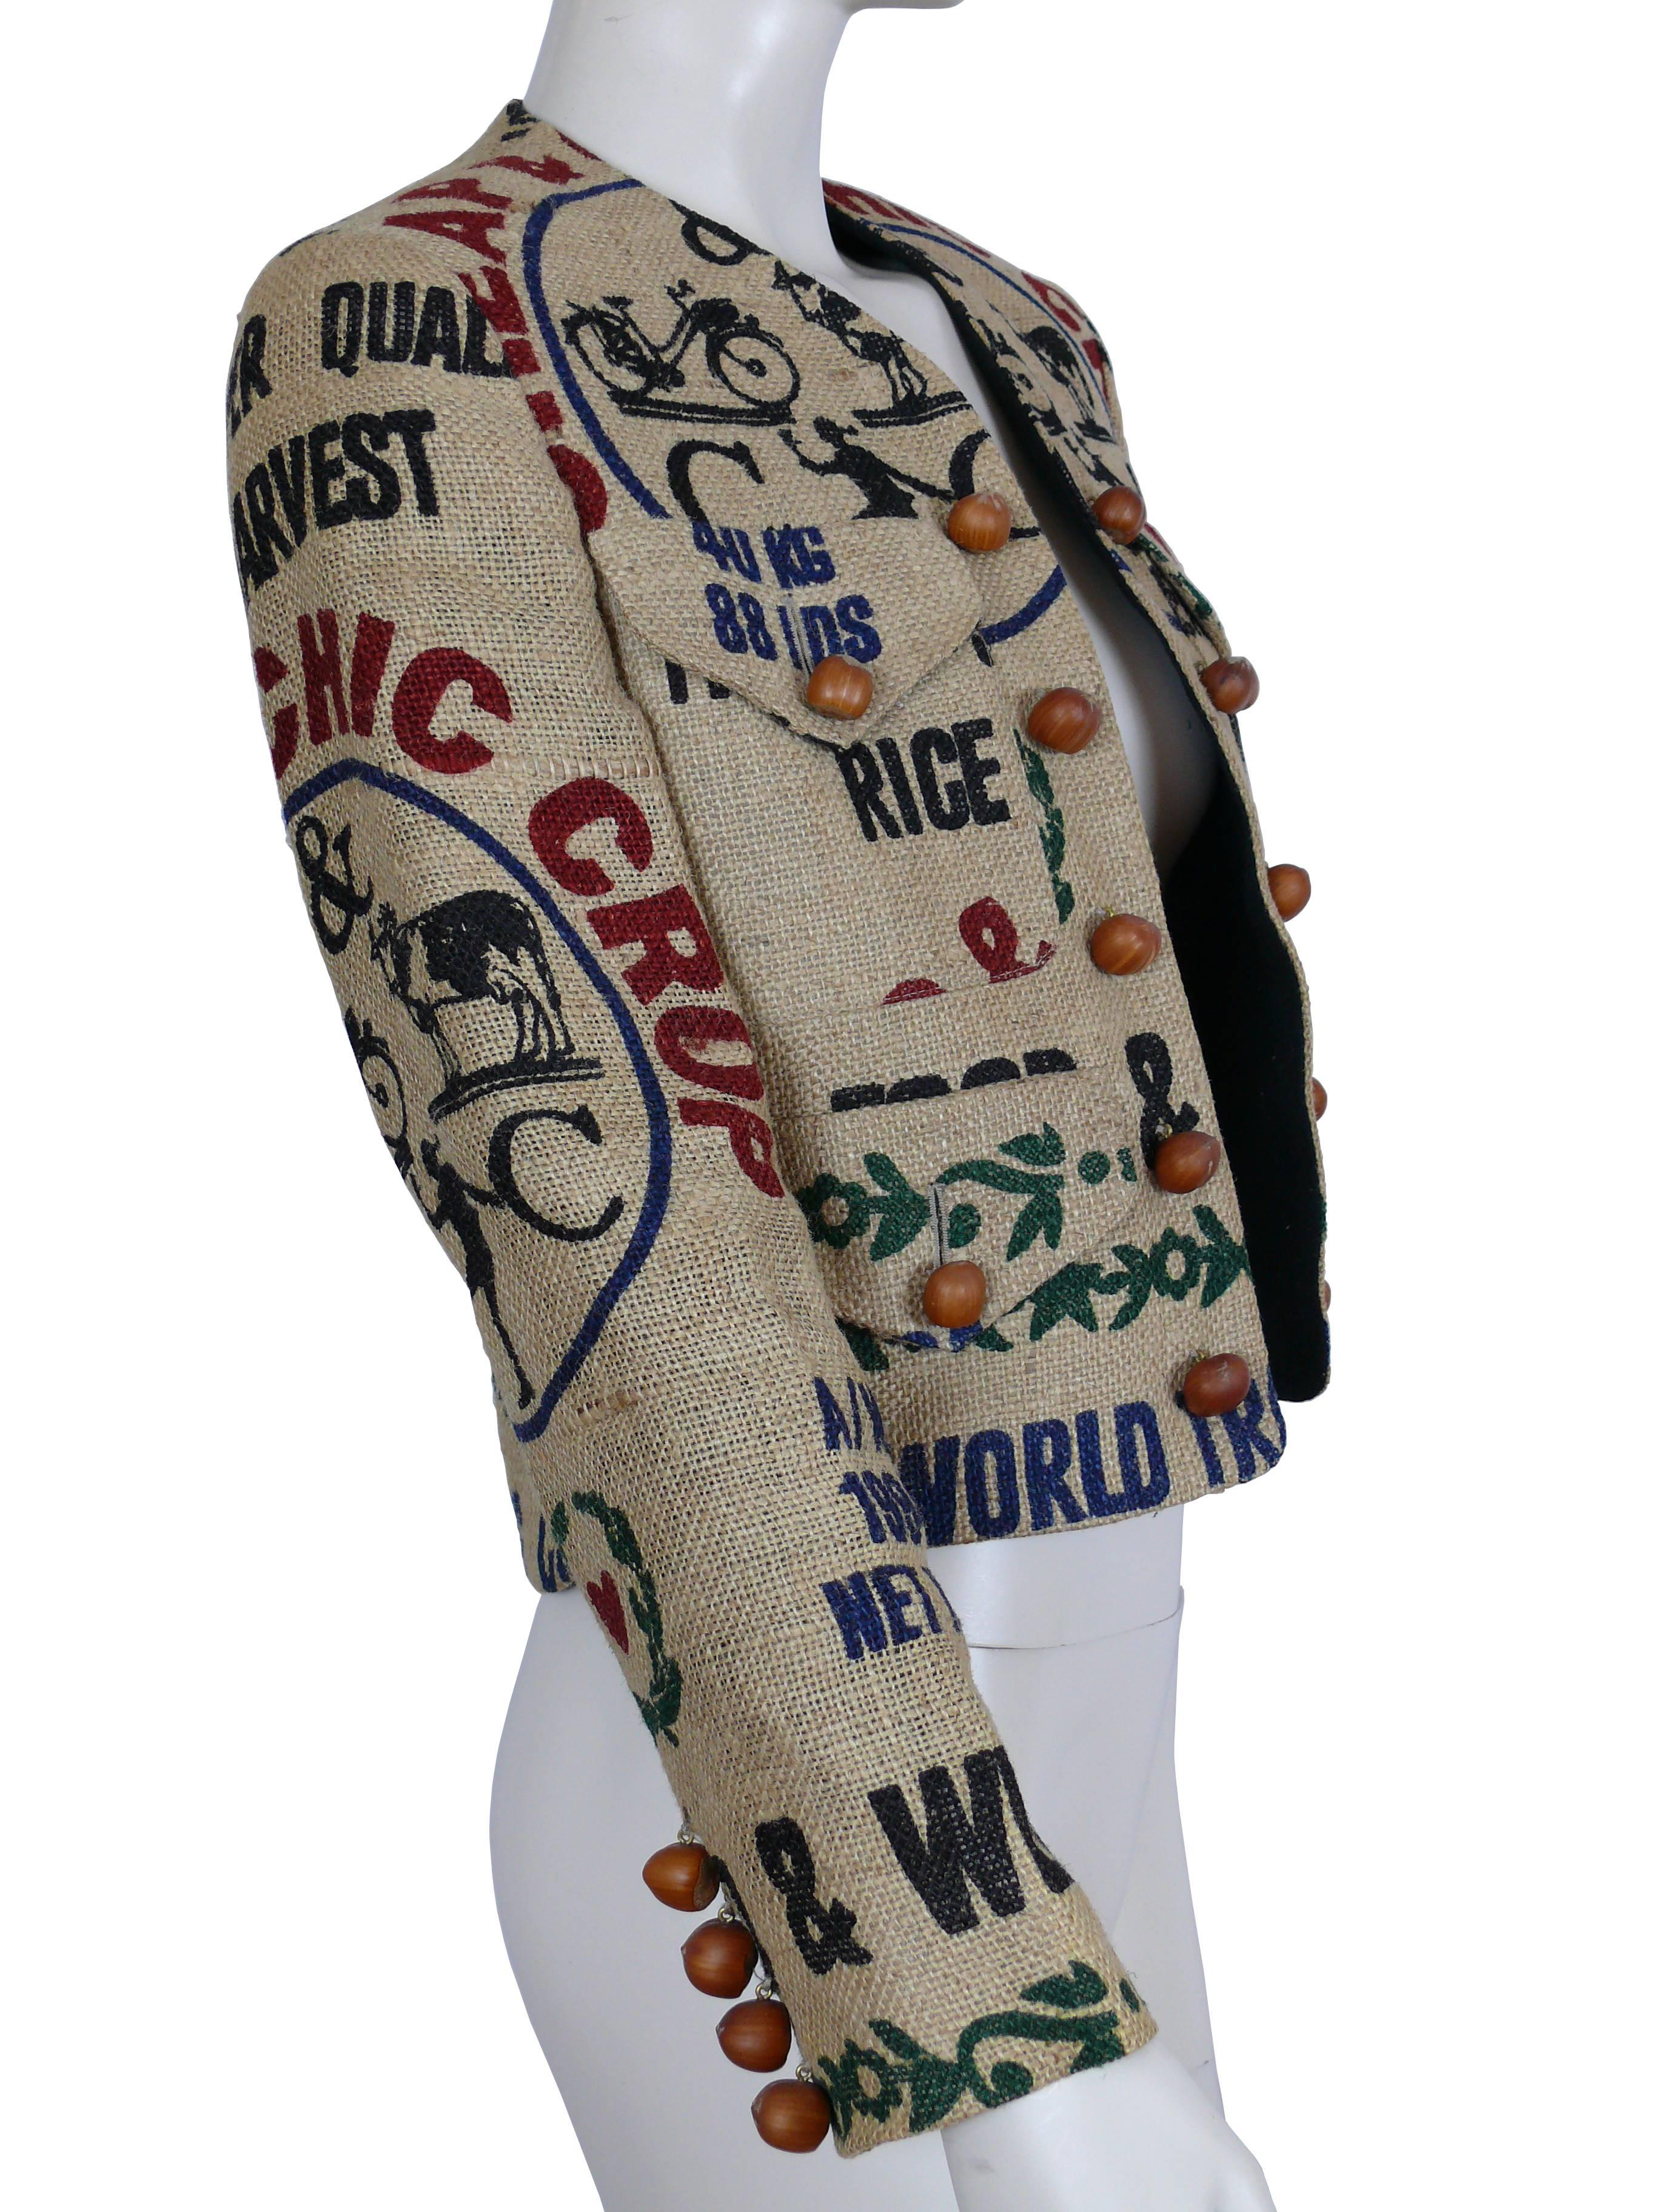 MOSCHINO vintage iconic short length jacket from Fall-Winter 1994 Collection made of a printed pure jute material.

Printed in farm stand inspired graphic patterns and the Moschino Cheap and Chic branding.

Open front.
Four front pockets (two